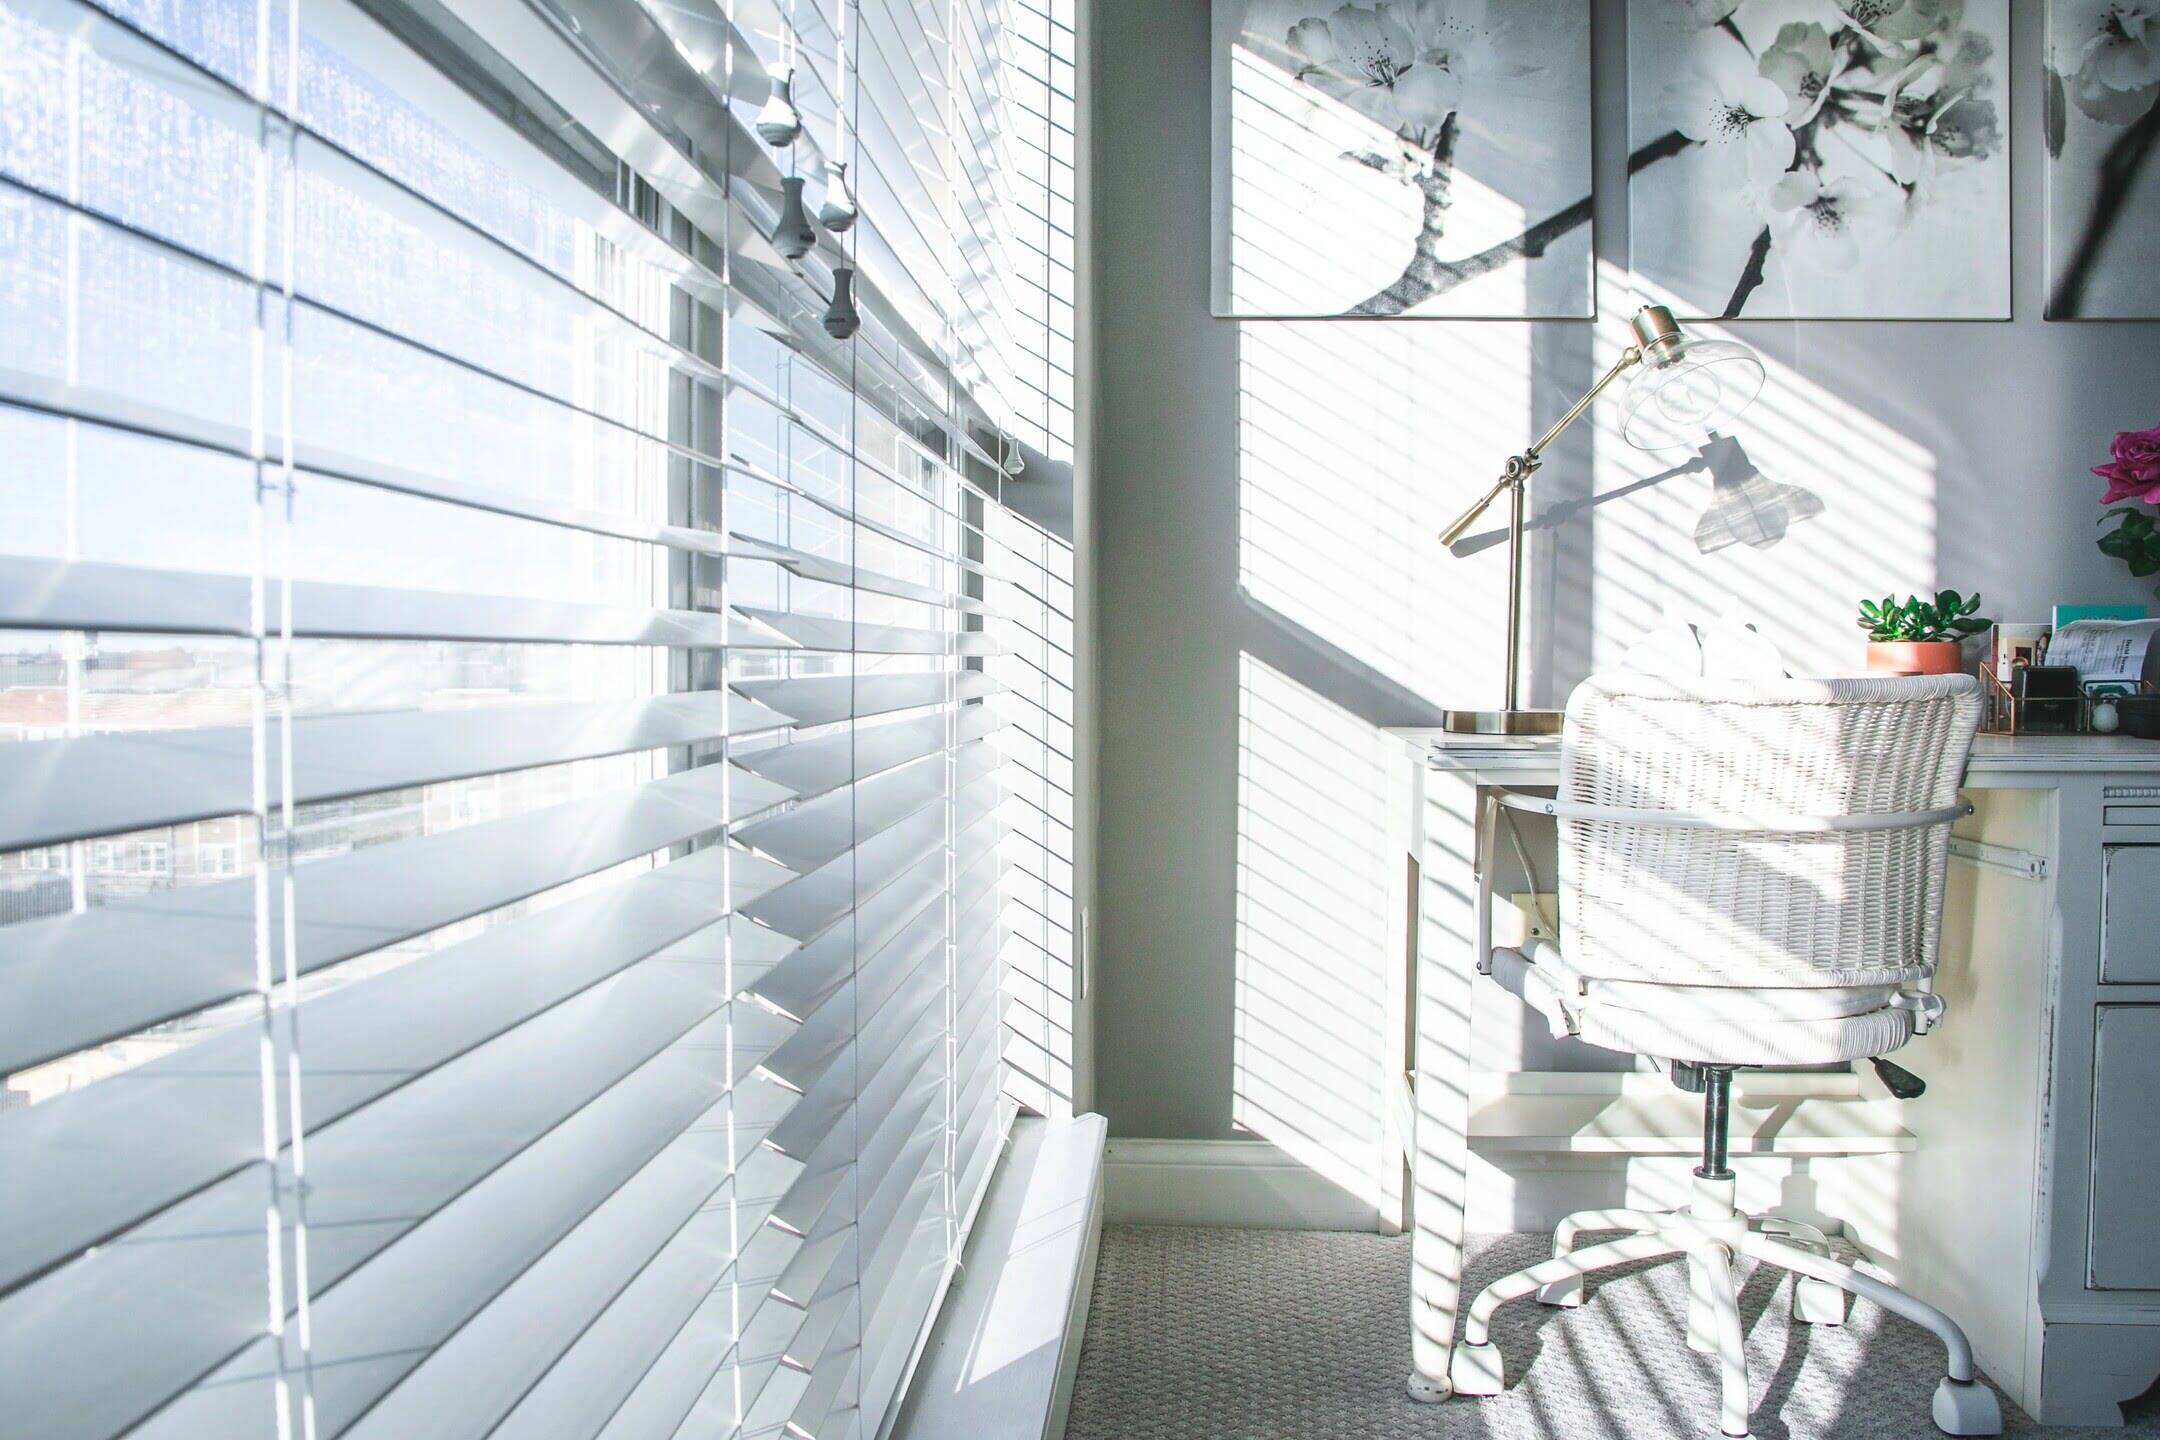 How To Fix Blinds In An Apartment